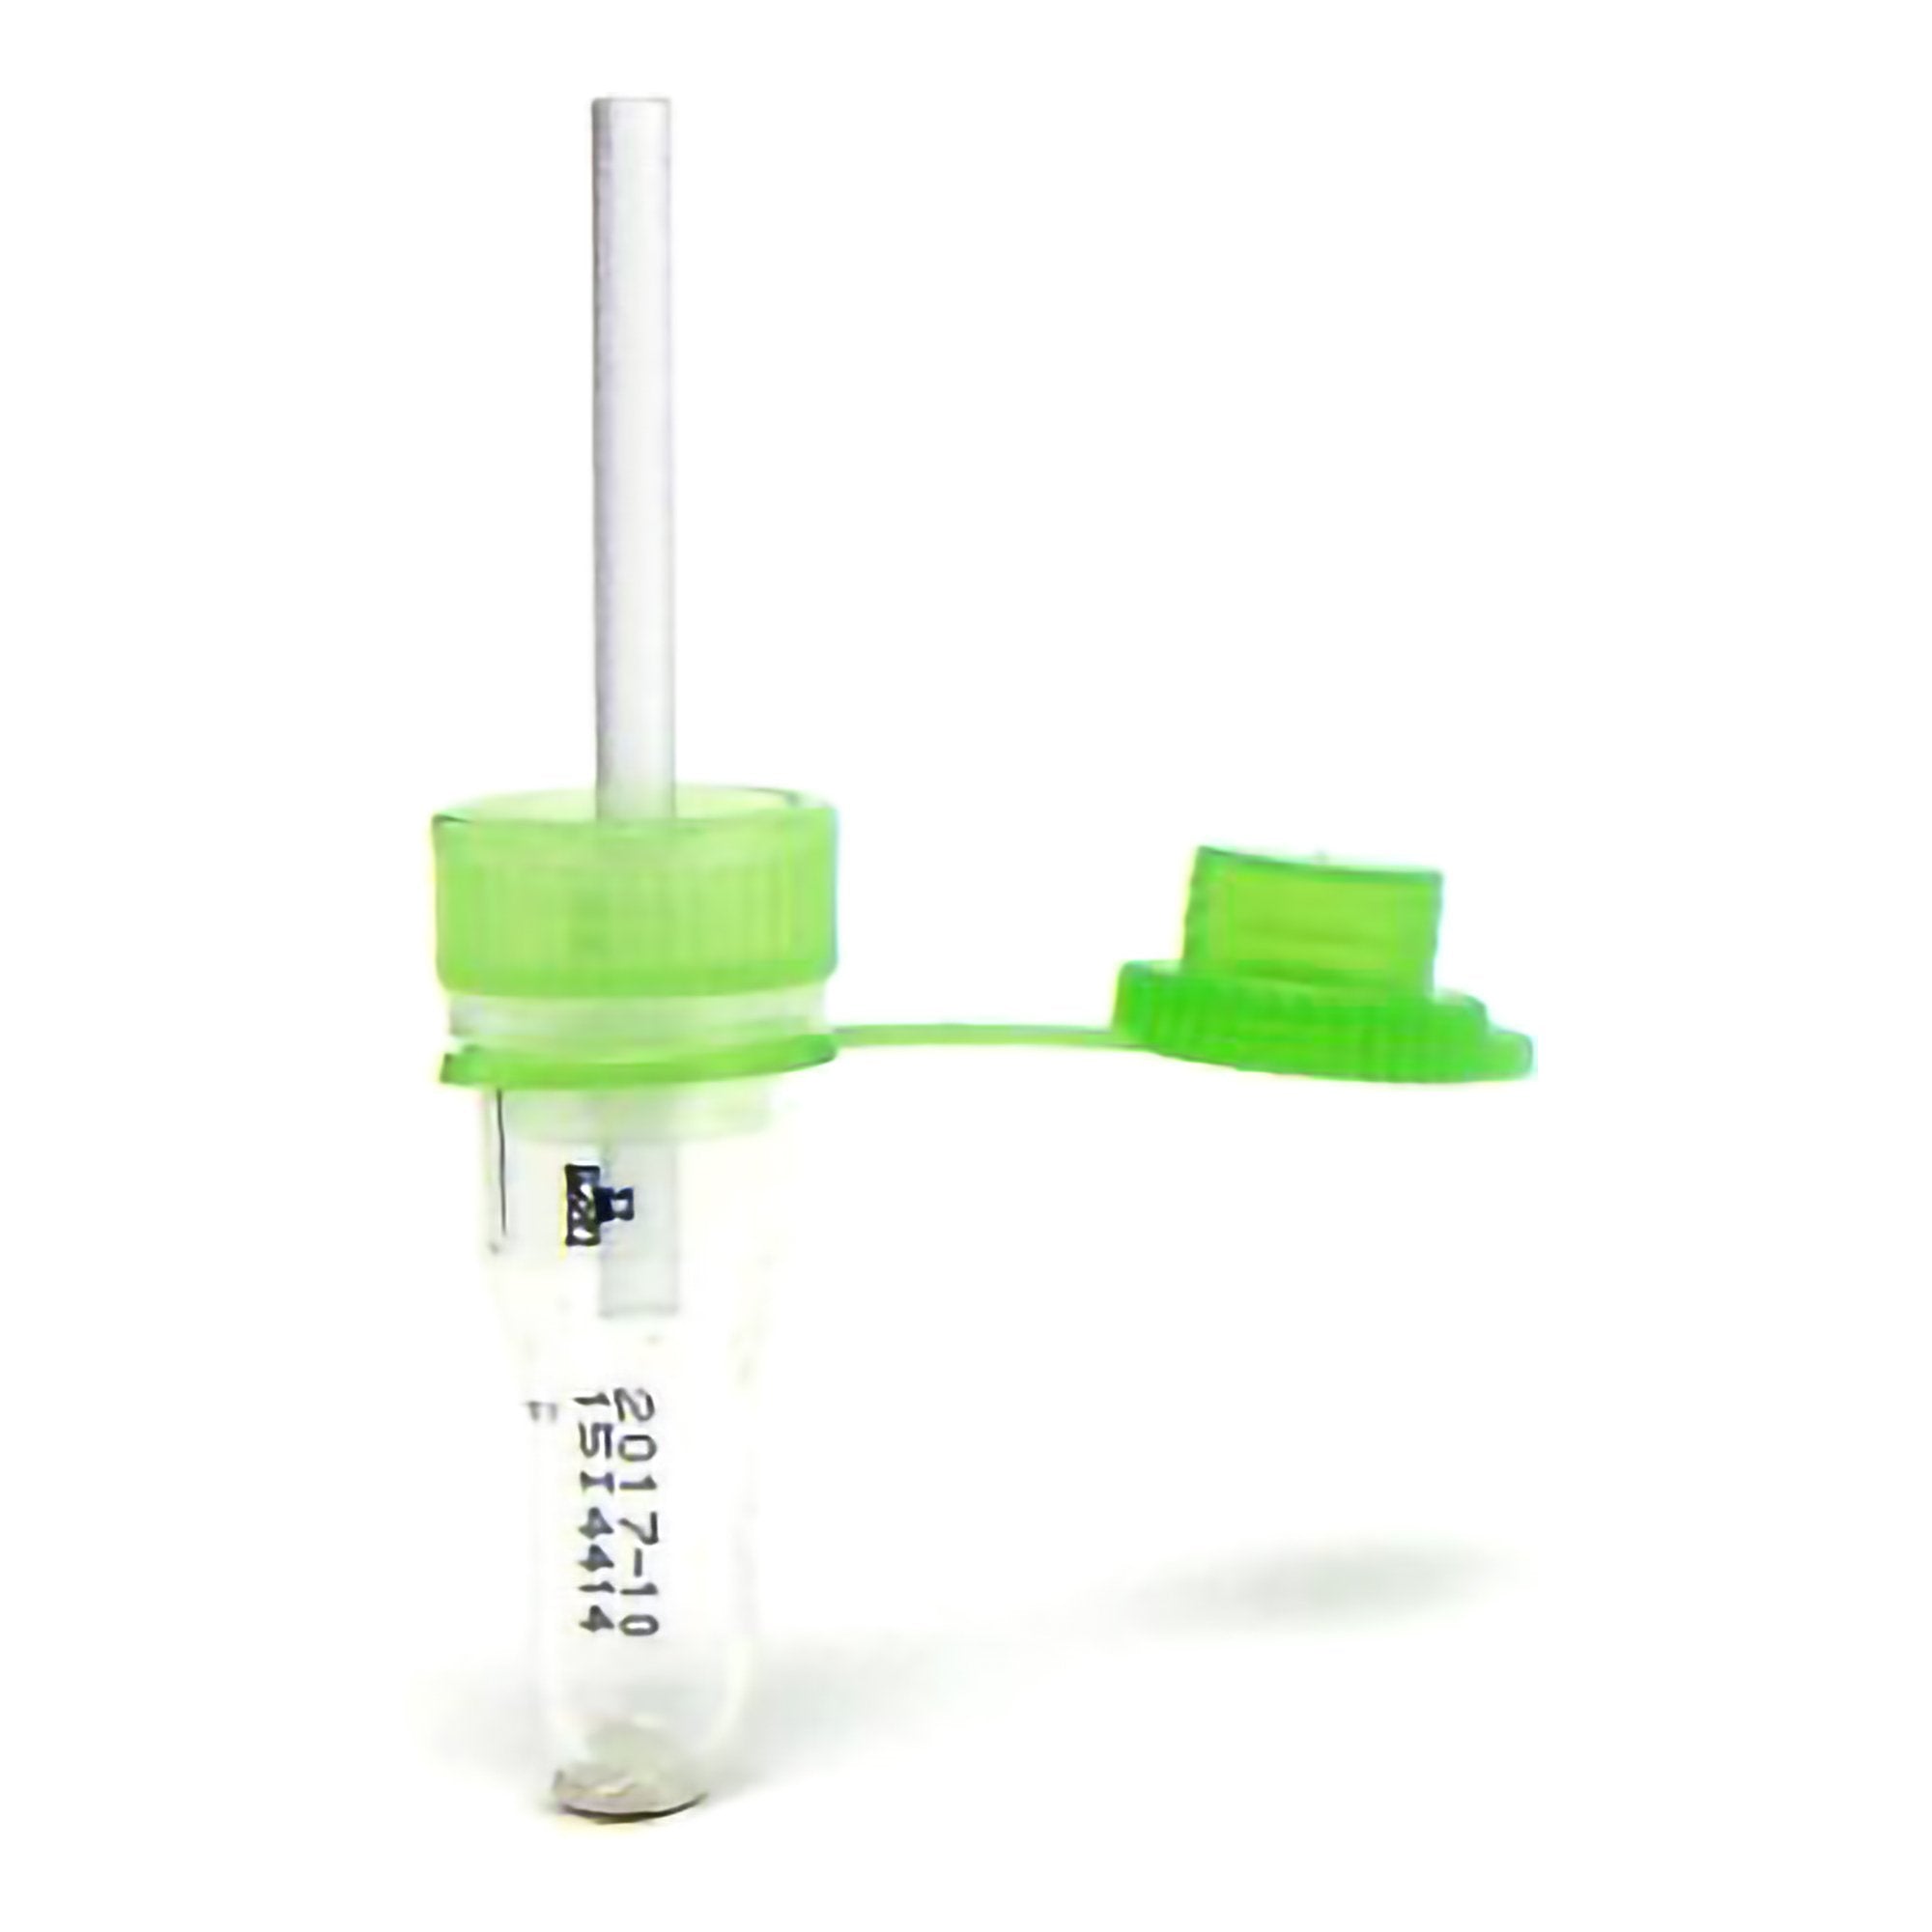 Safe-T-Fill Capillary Blood Collection Tube Plasma Tube Lithium Heparin Additive 1.1 mm Diameter 125 L Green Pierceable Attached Cap Plastic Tube